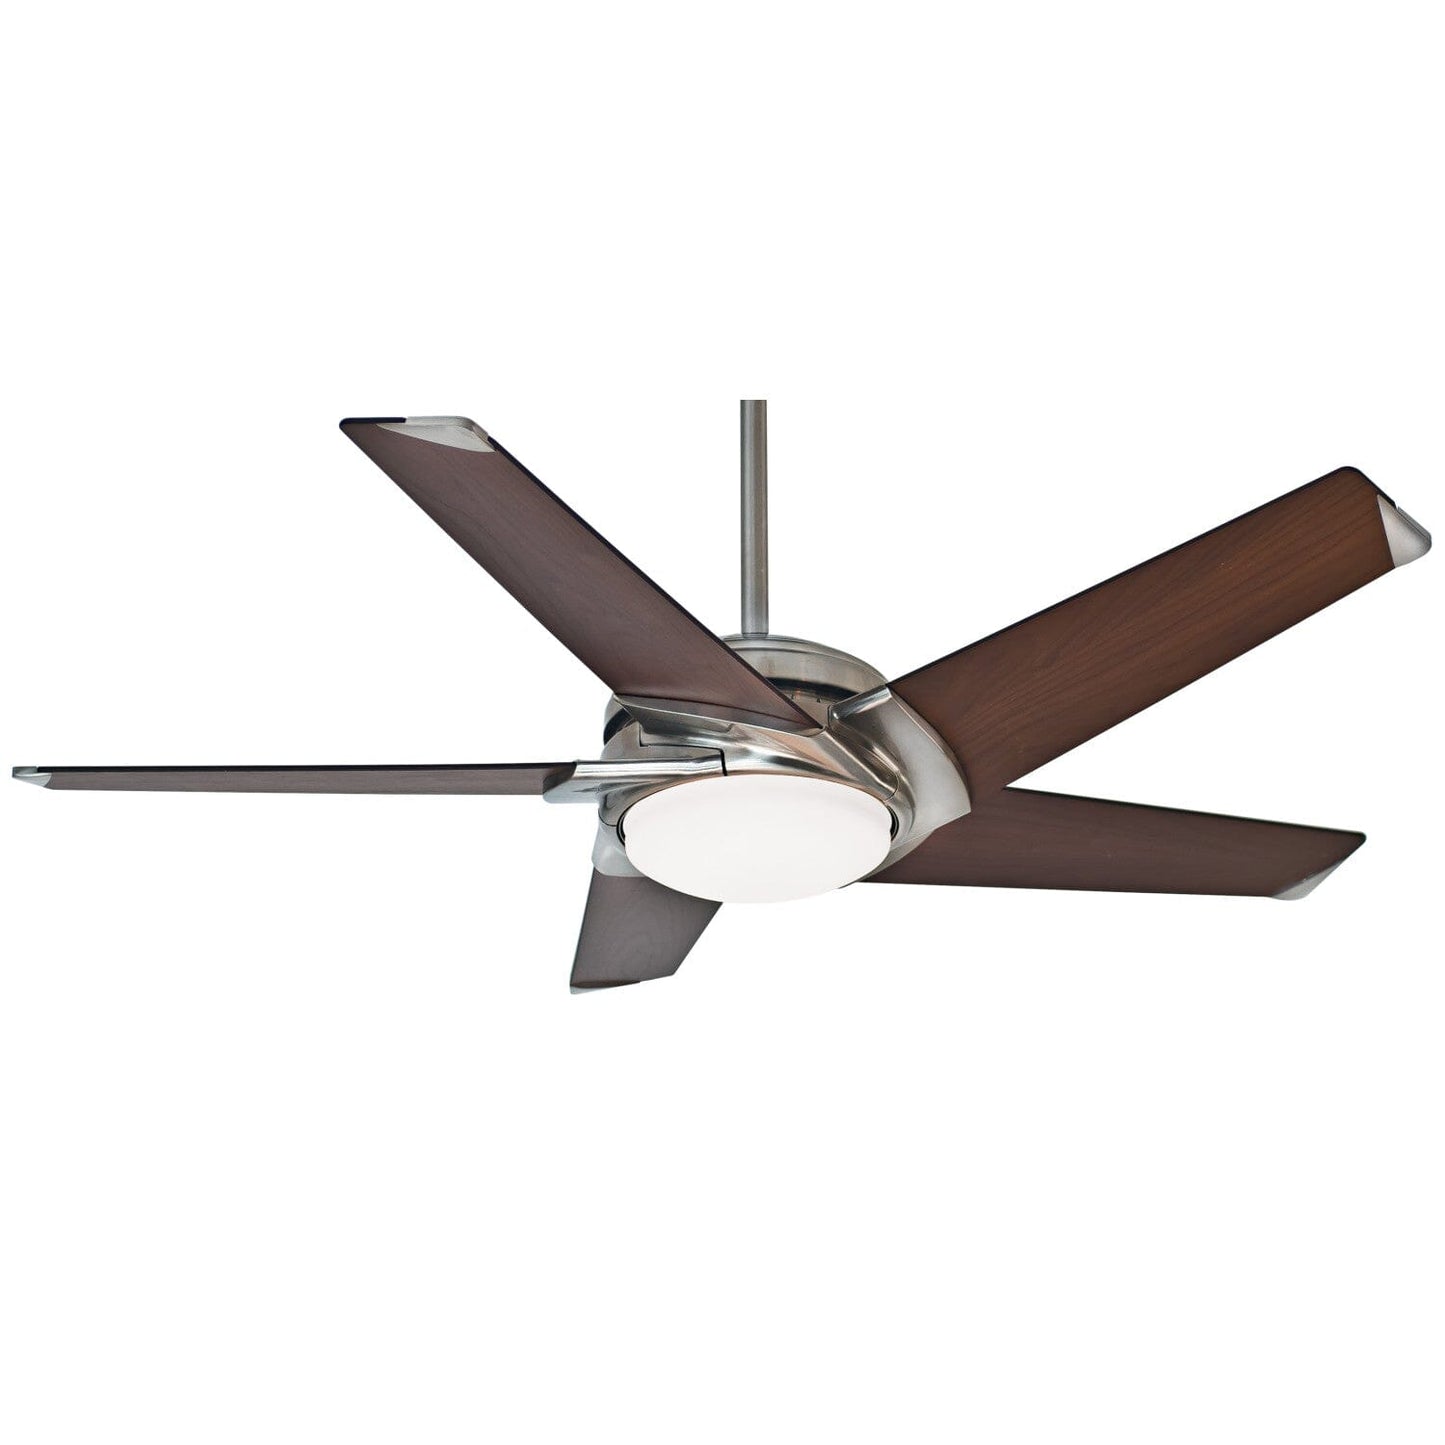 Stealth DC with LED Light 54 inch Ceiling Fans Casablanca Brushed Nickel - Walnut 